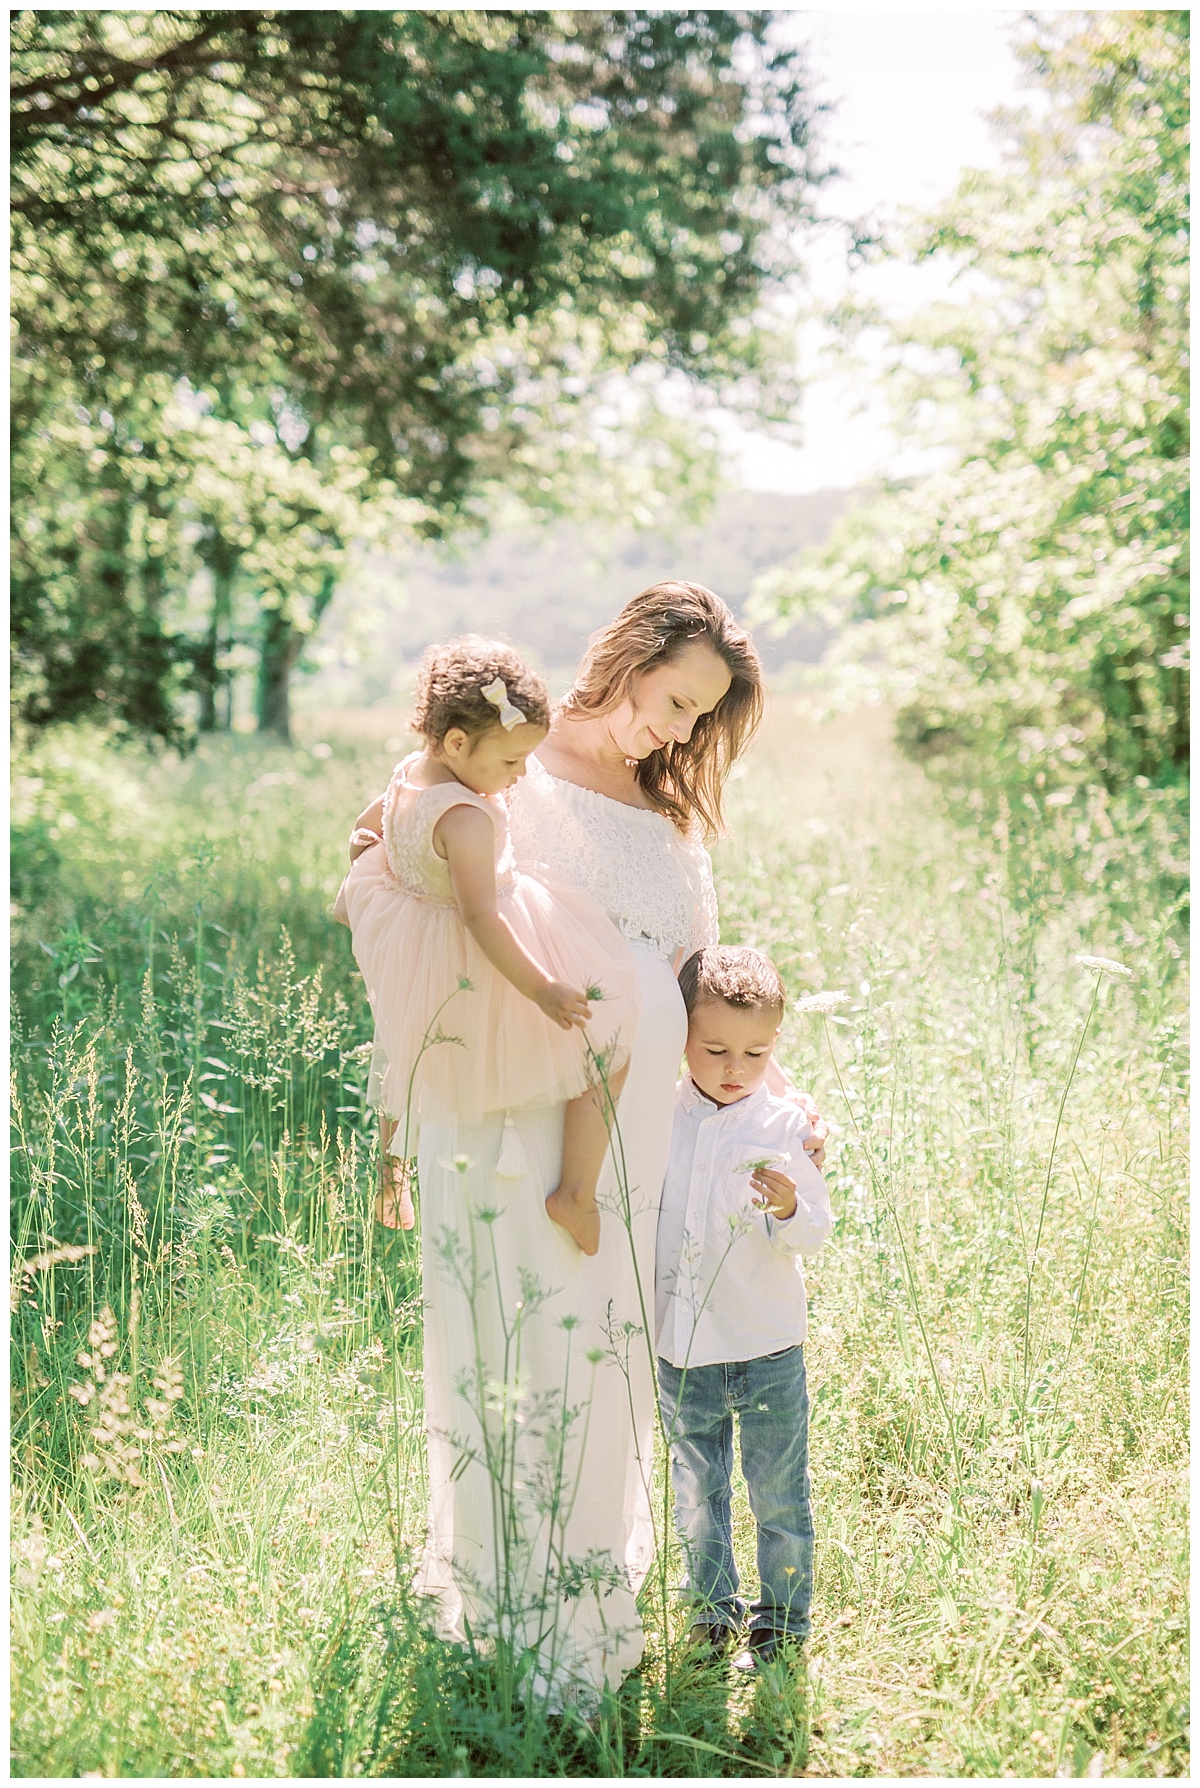 Outdoor film family maternity session by Grace Paul Photography.